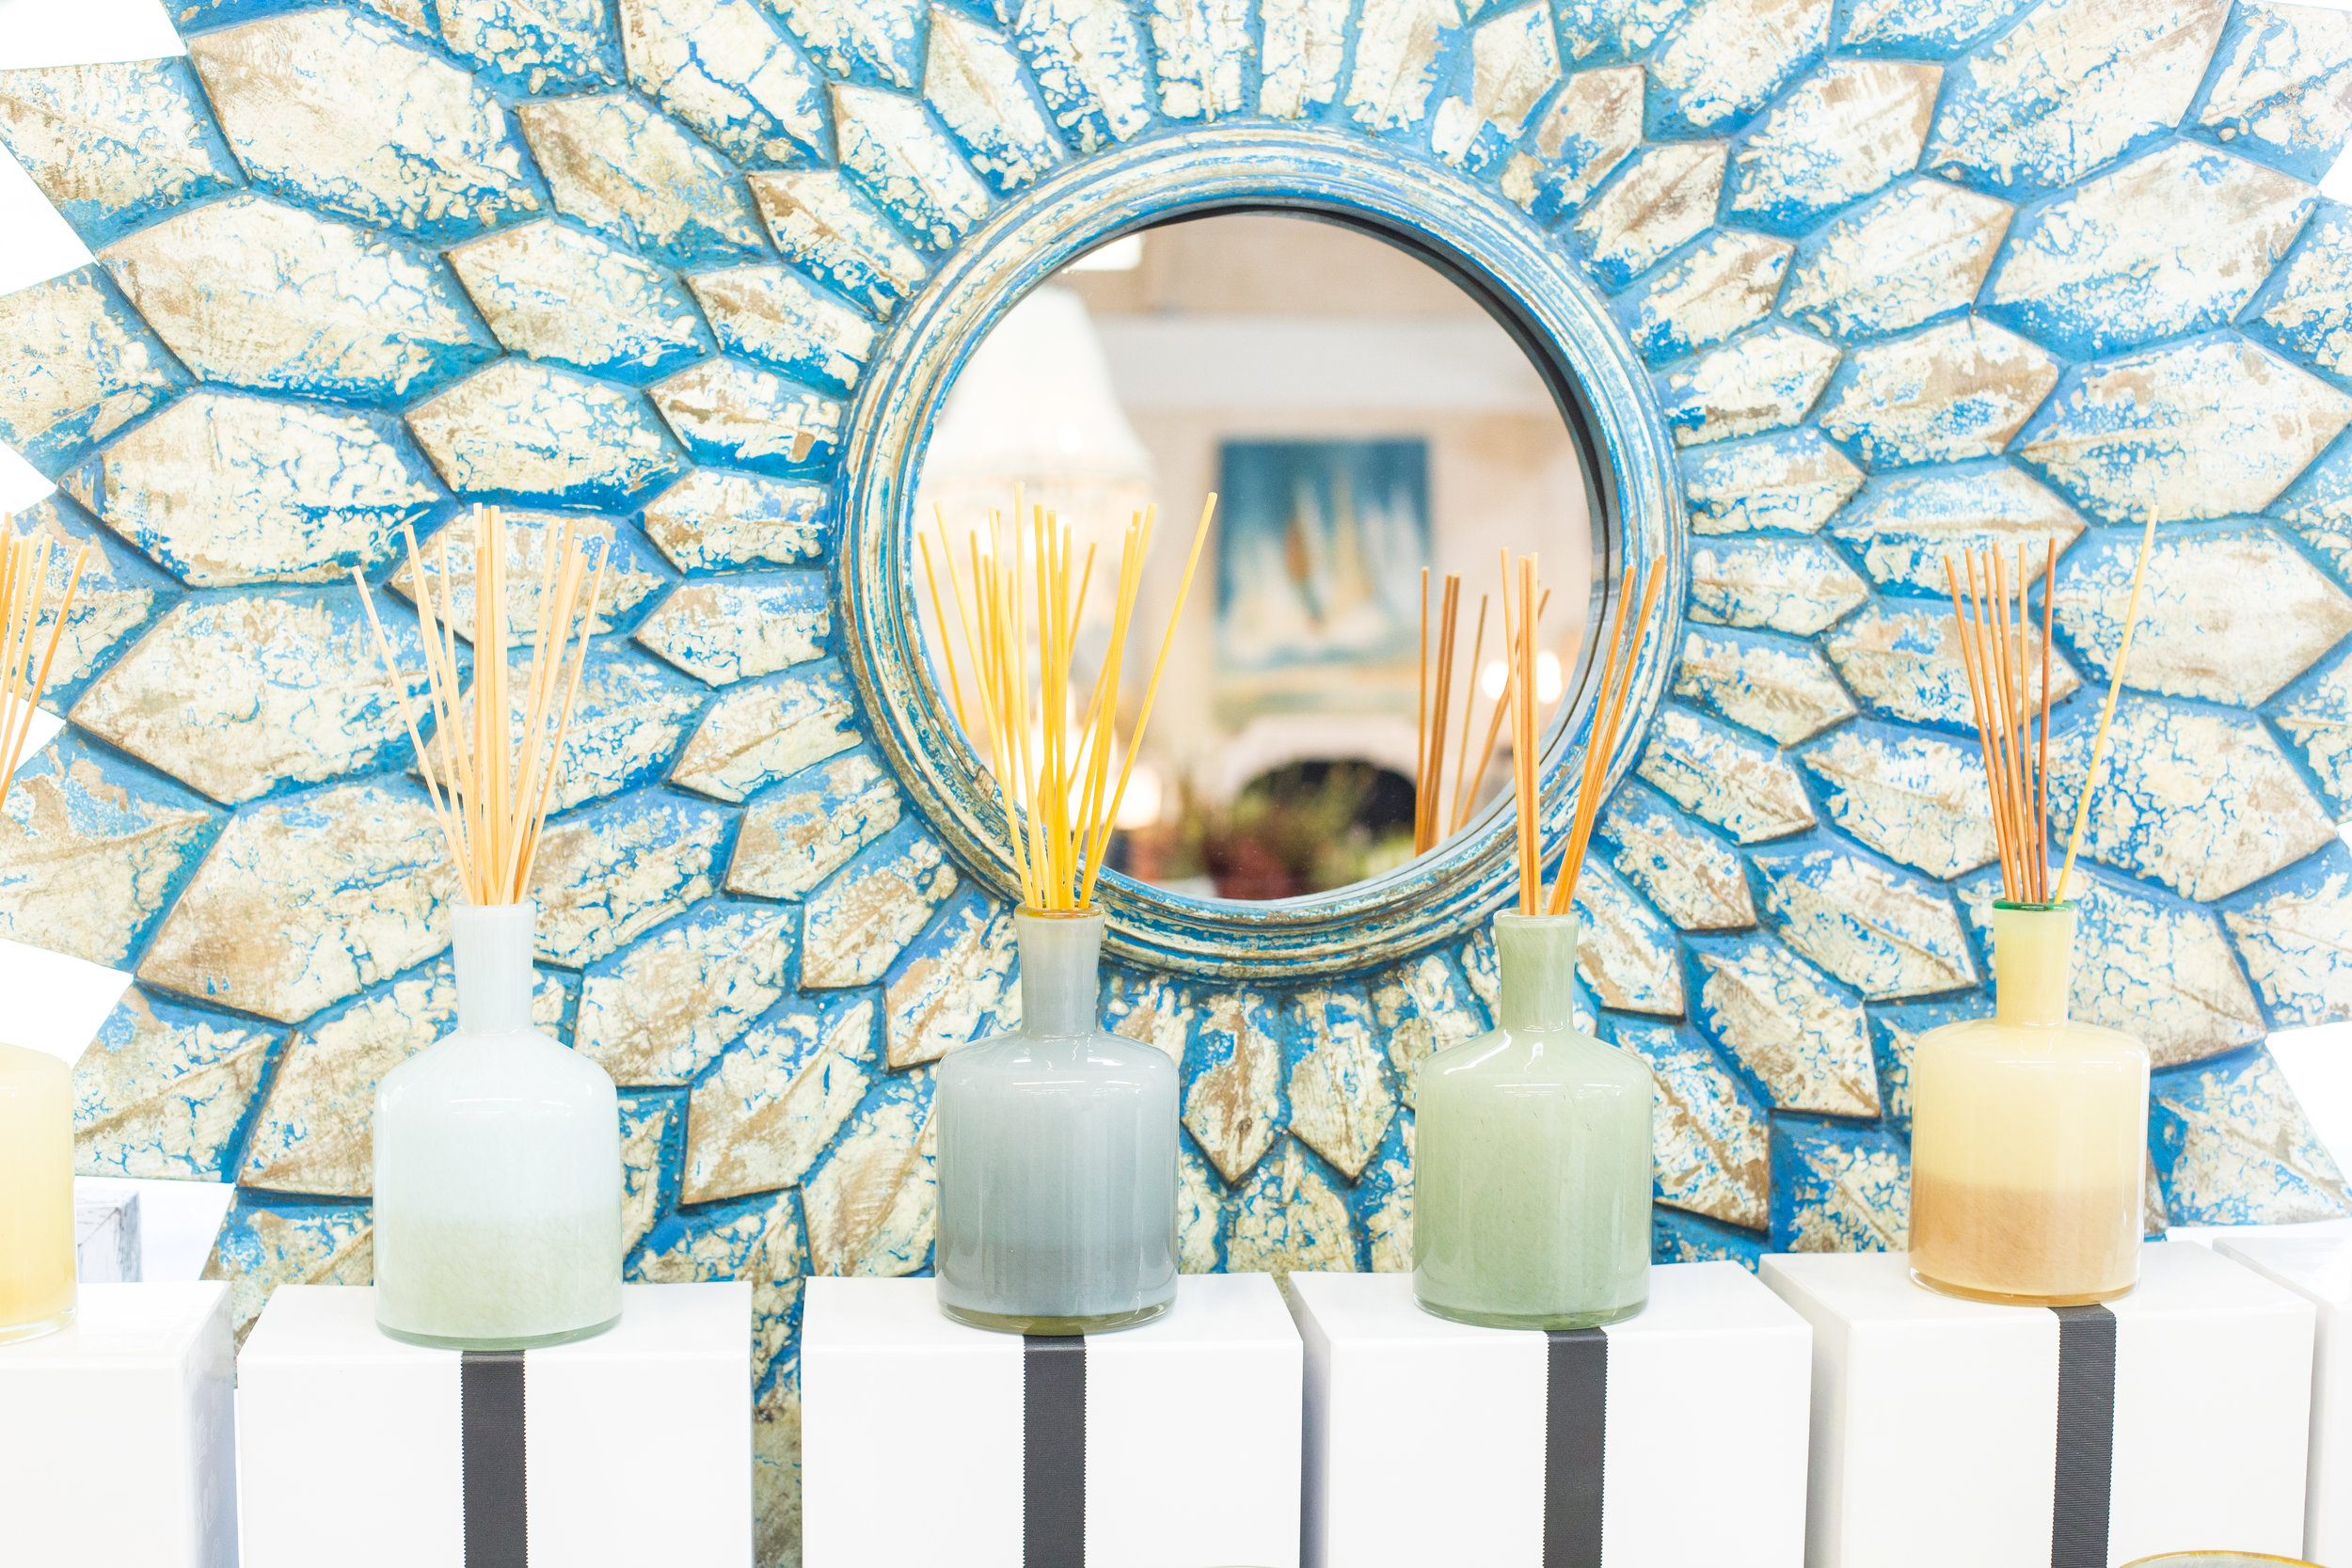 Turquoise mirror, colorful diffusers